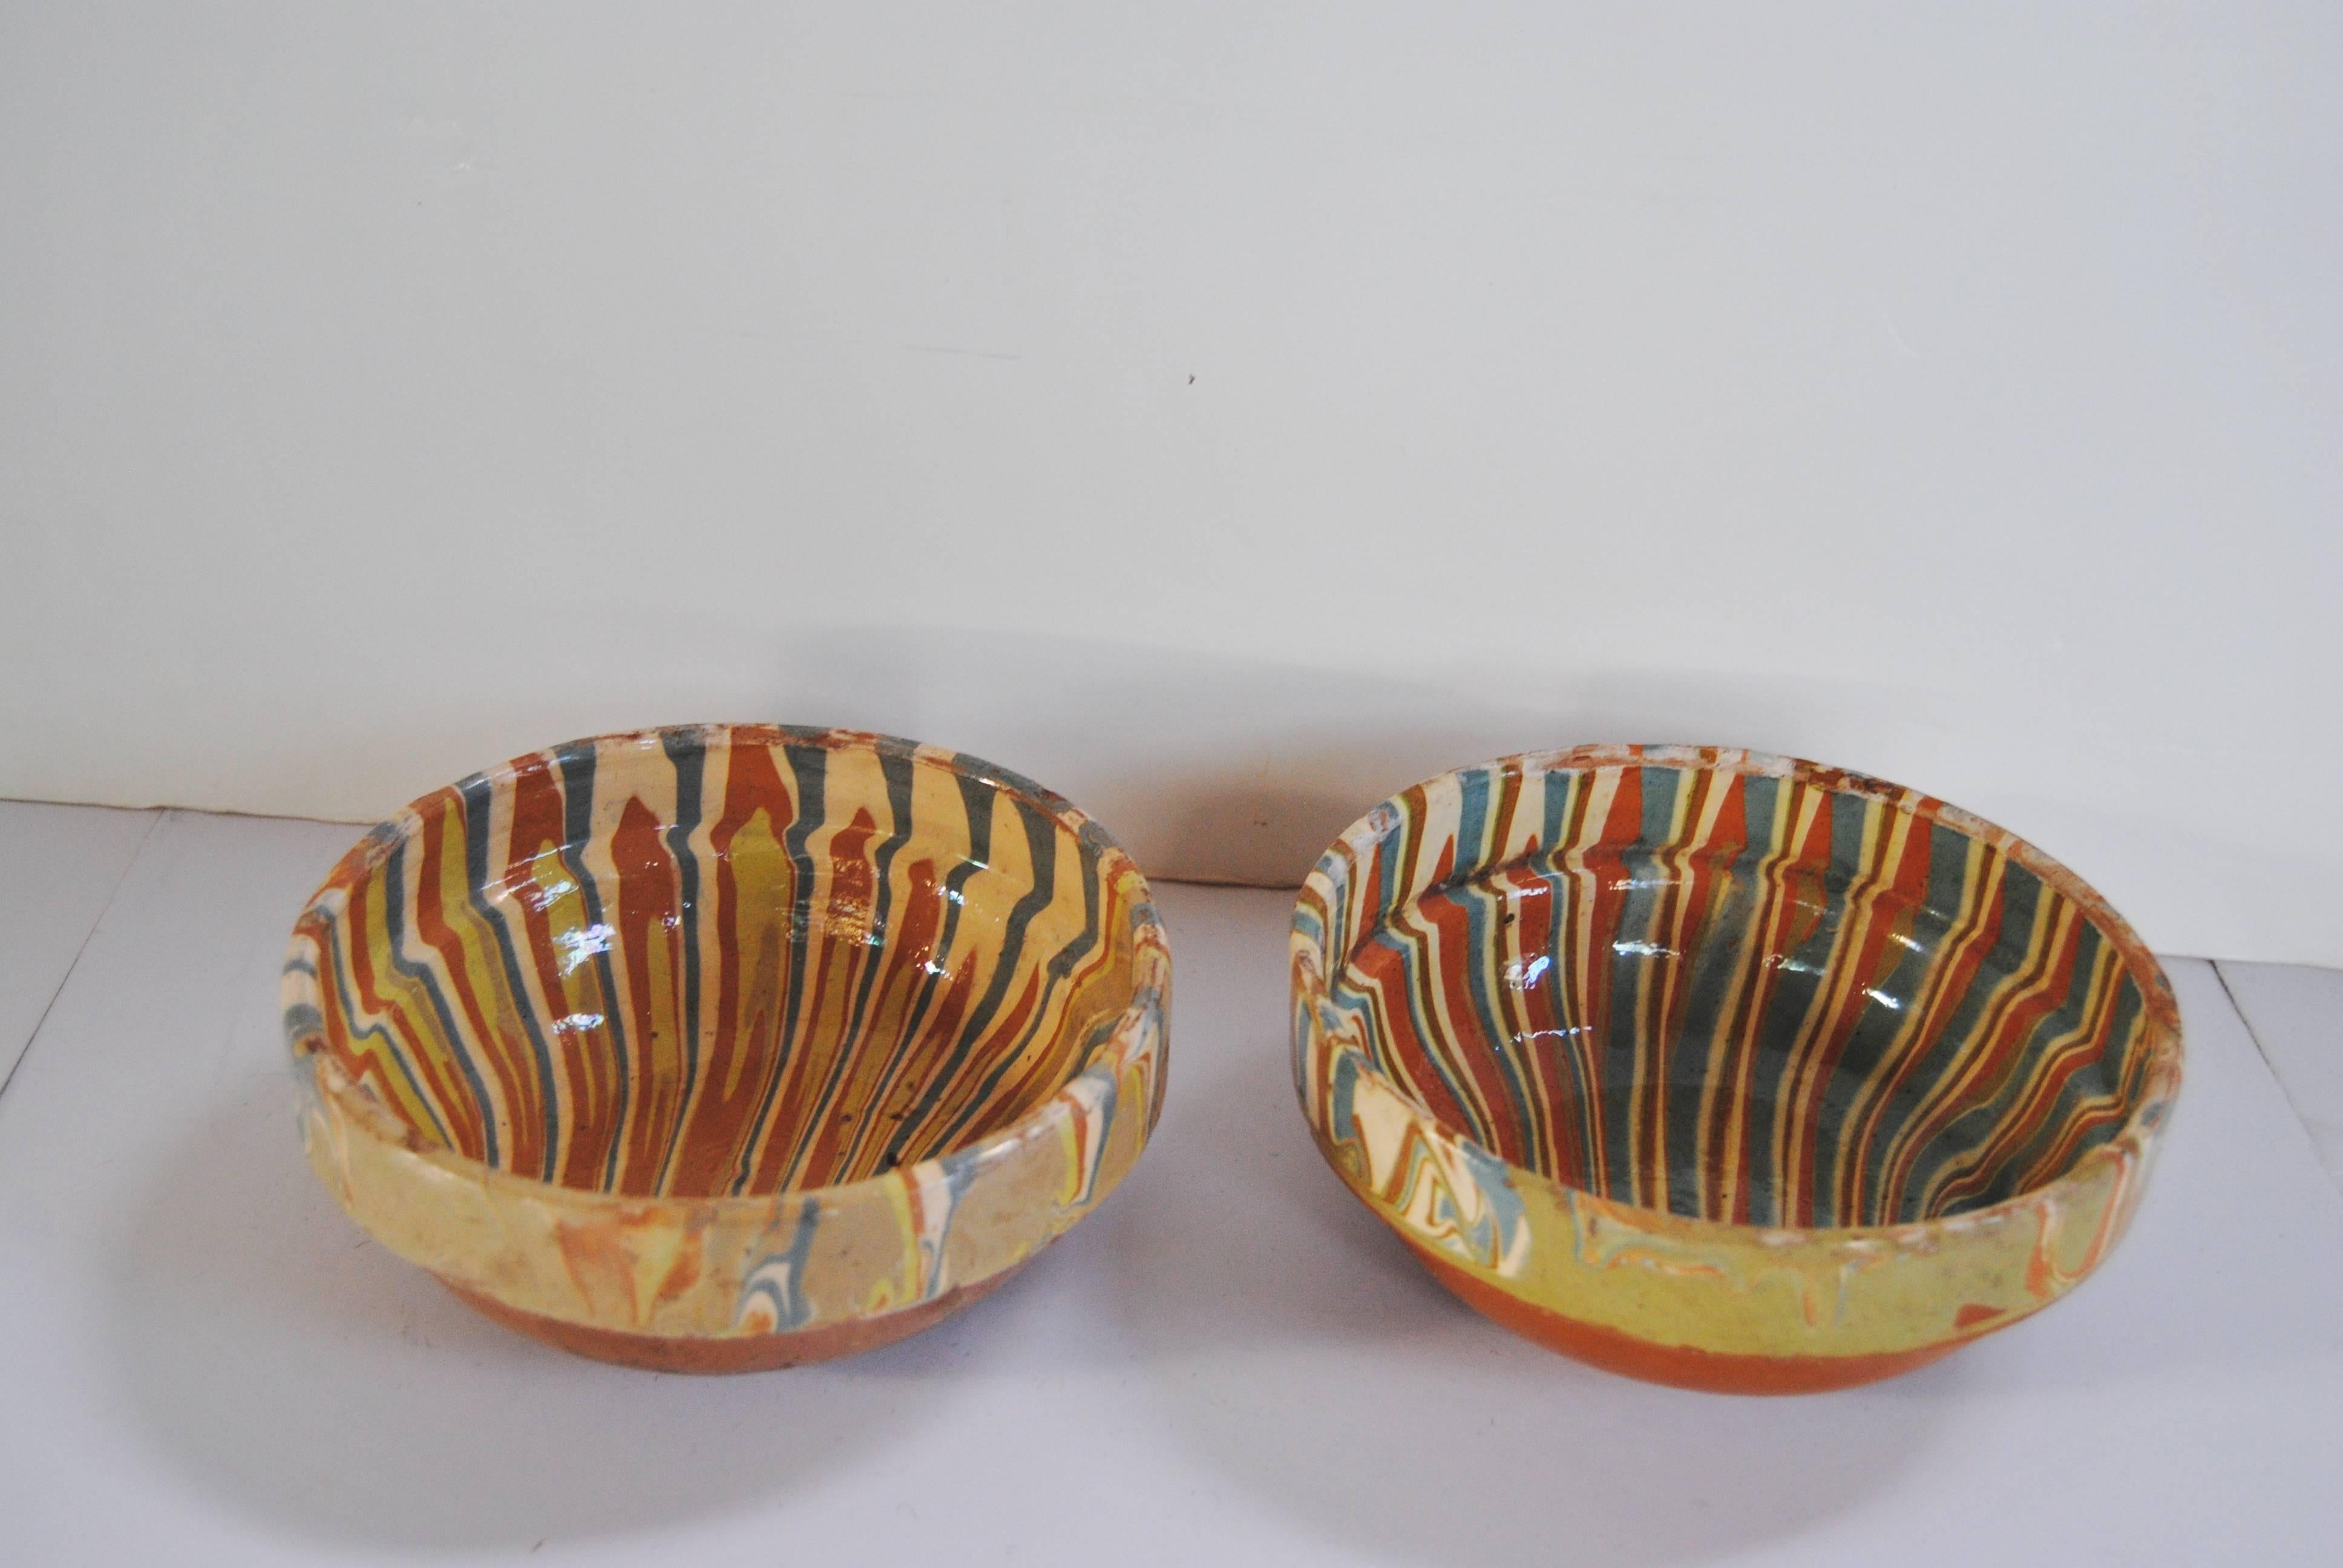 Hand thrown slipware pottery bowls from Transylvania, Romania. Made early 20th century, the pattern incorporates swirls of blue, green, cinnamon and dream similar to the French jaspe patterns. Minor wear on edges of bowls, consistent with use.